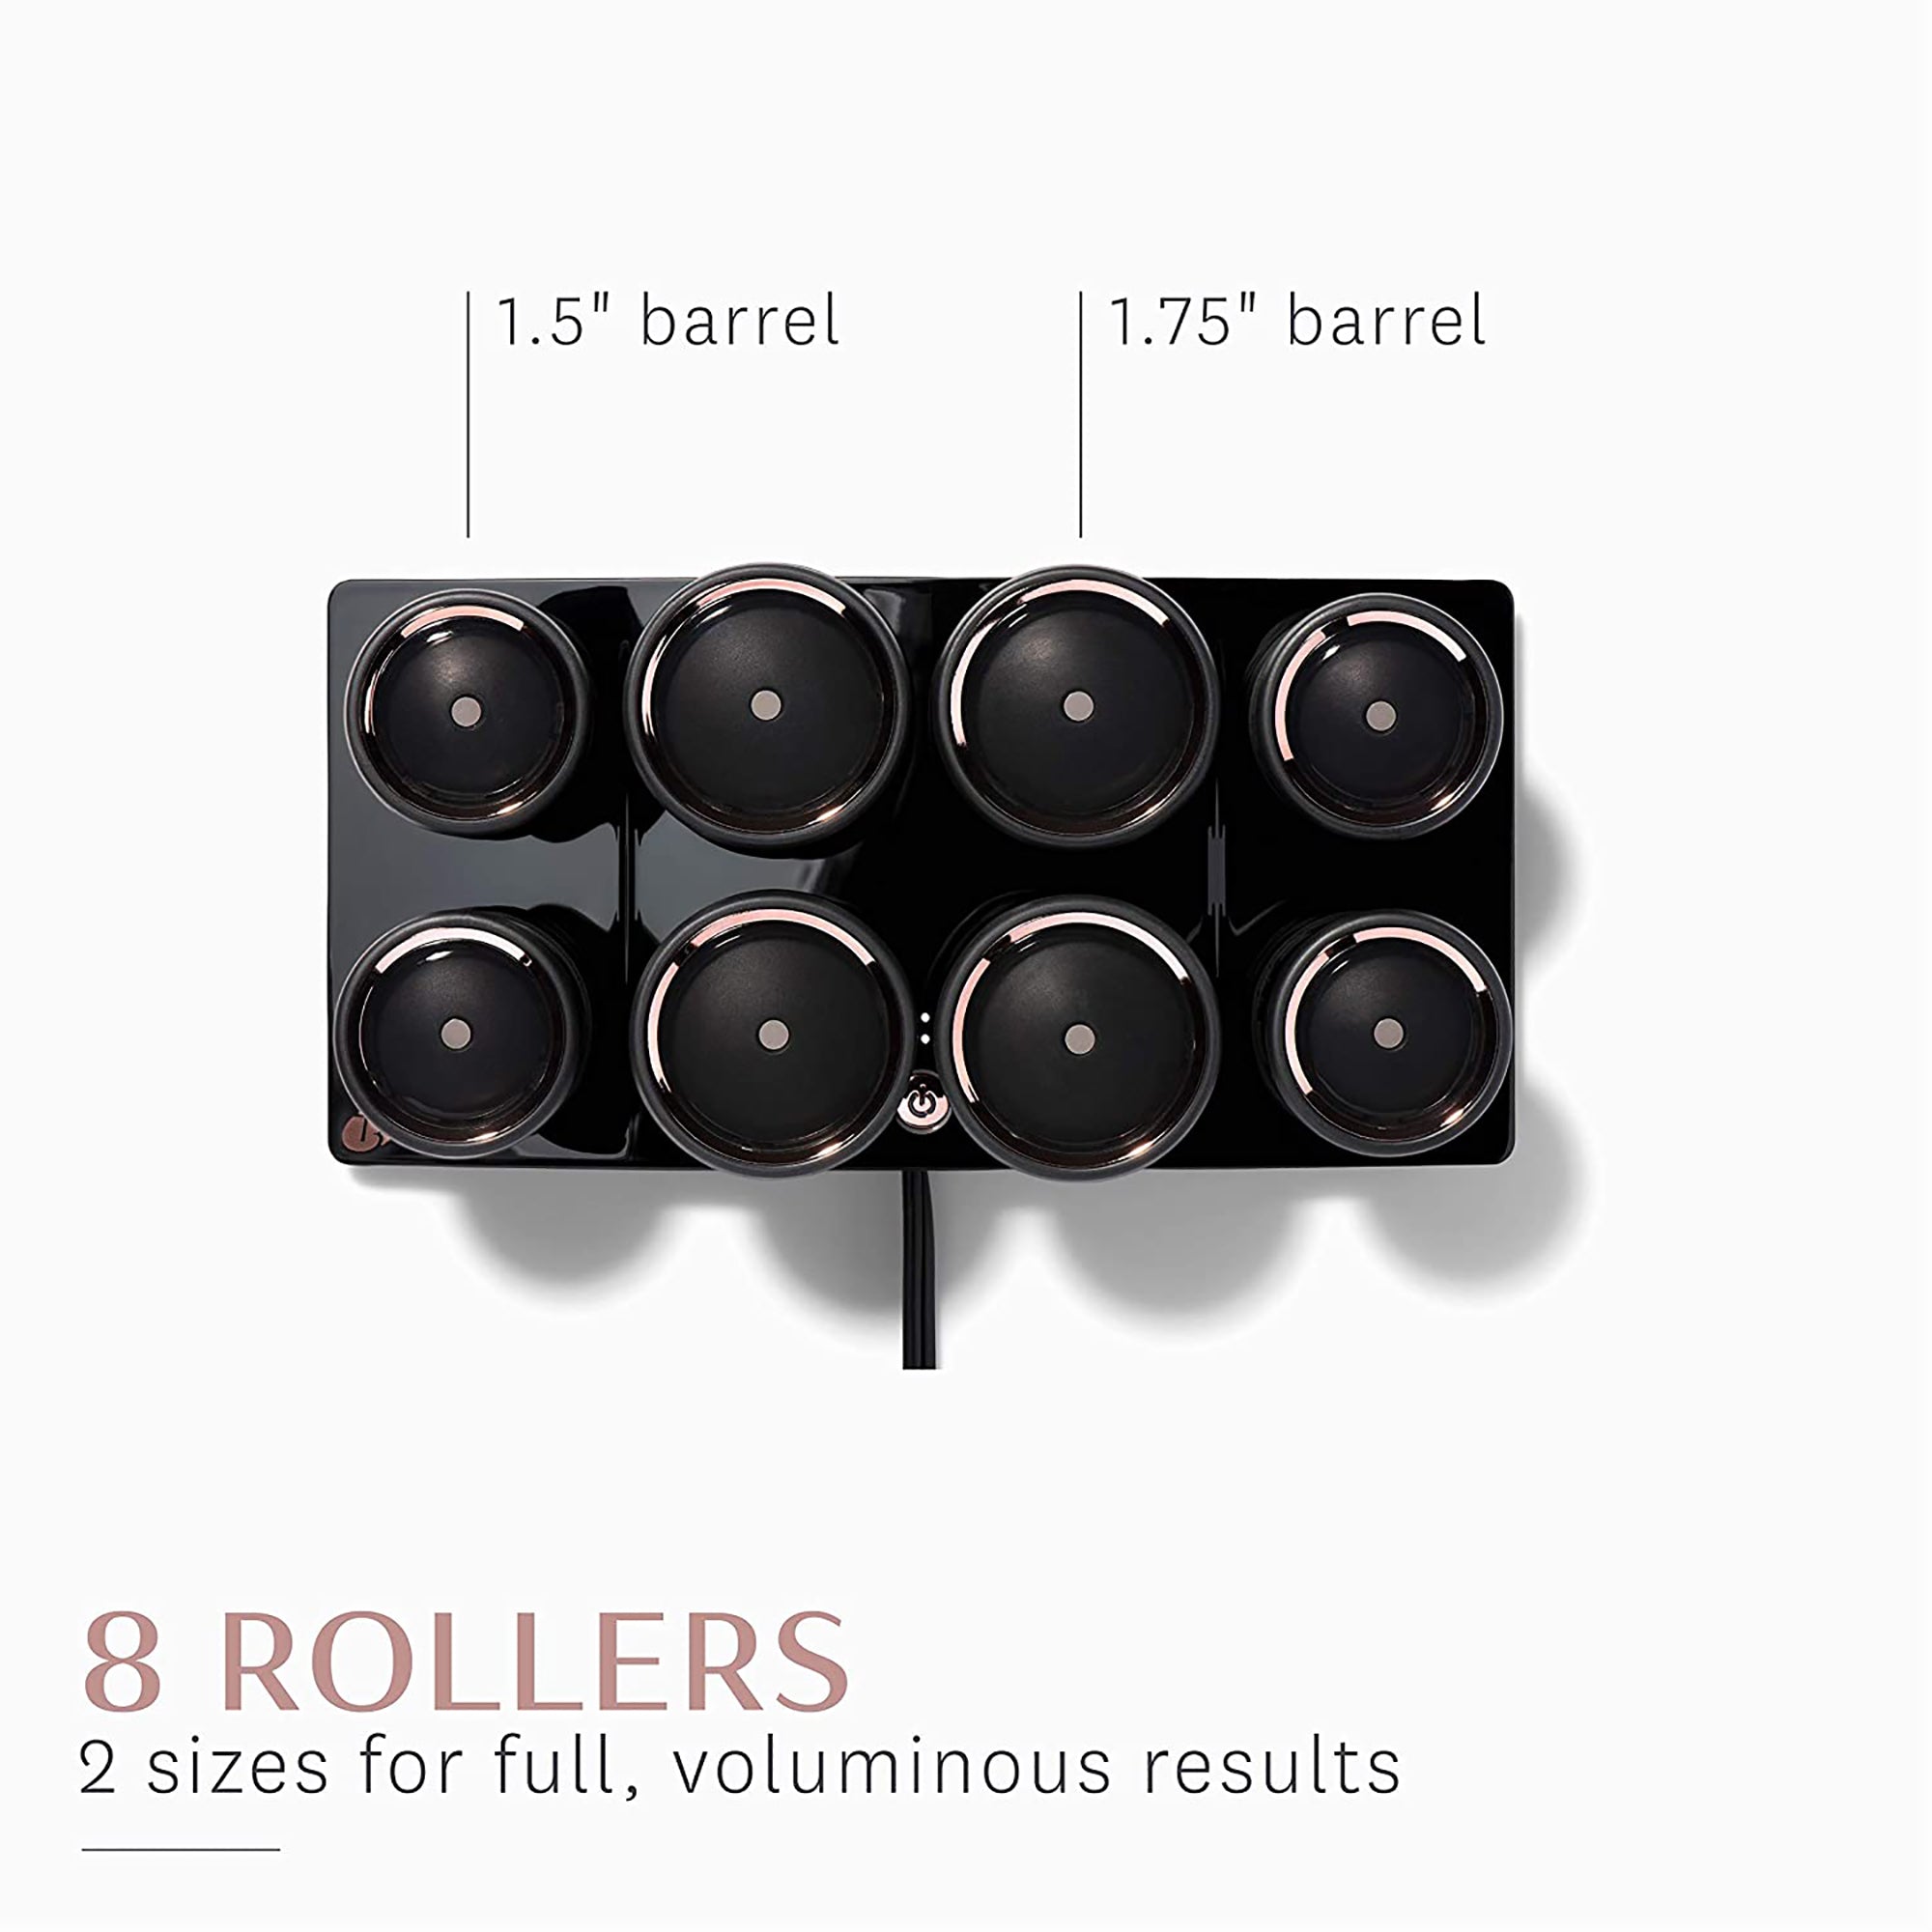 T3 Volumizing Hot Rollers LUXE / 8PC